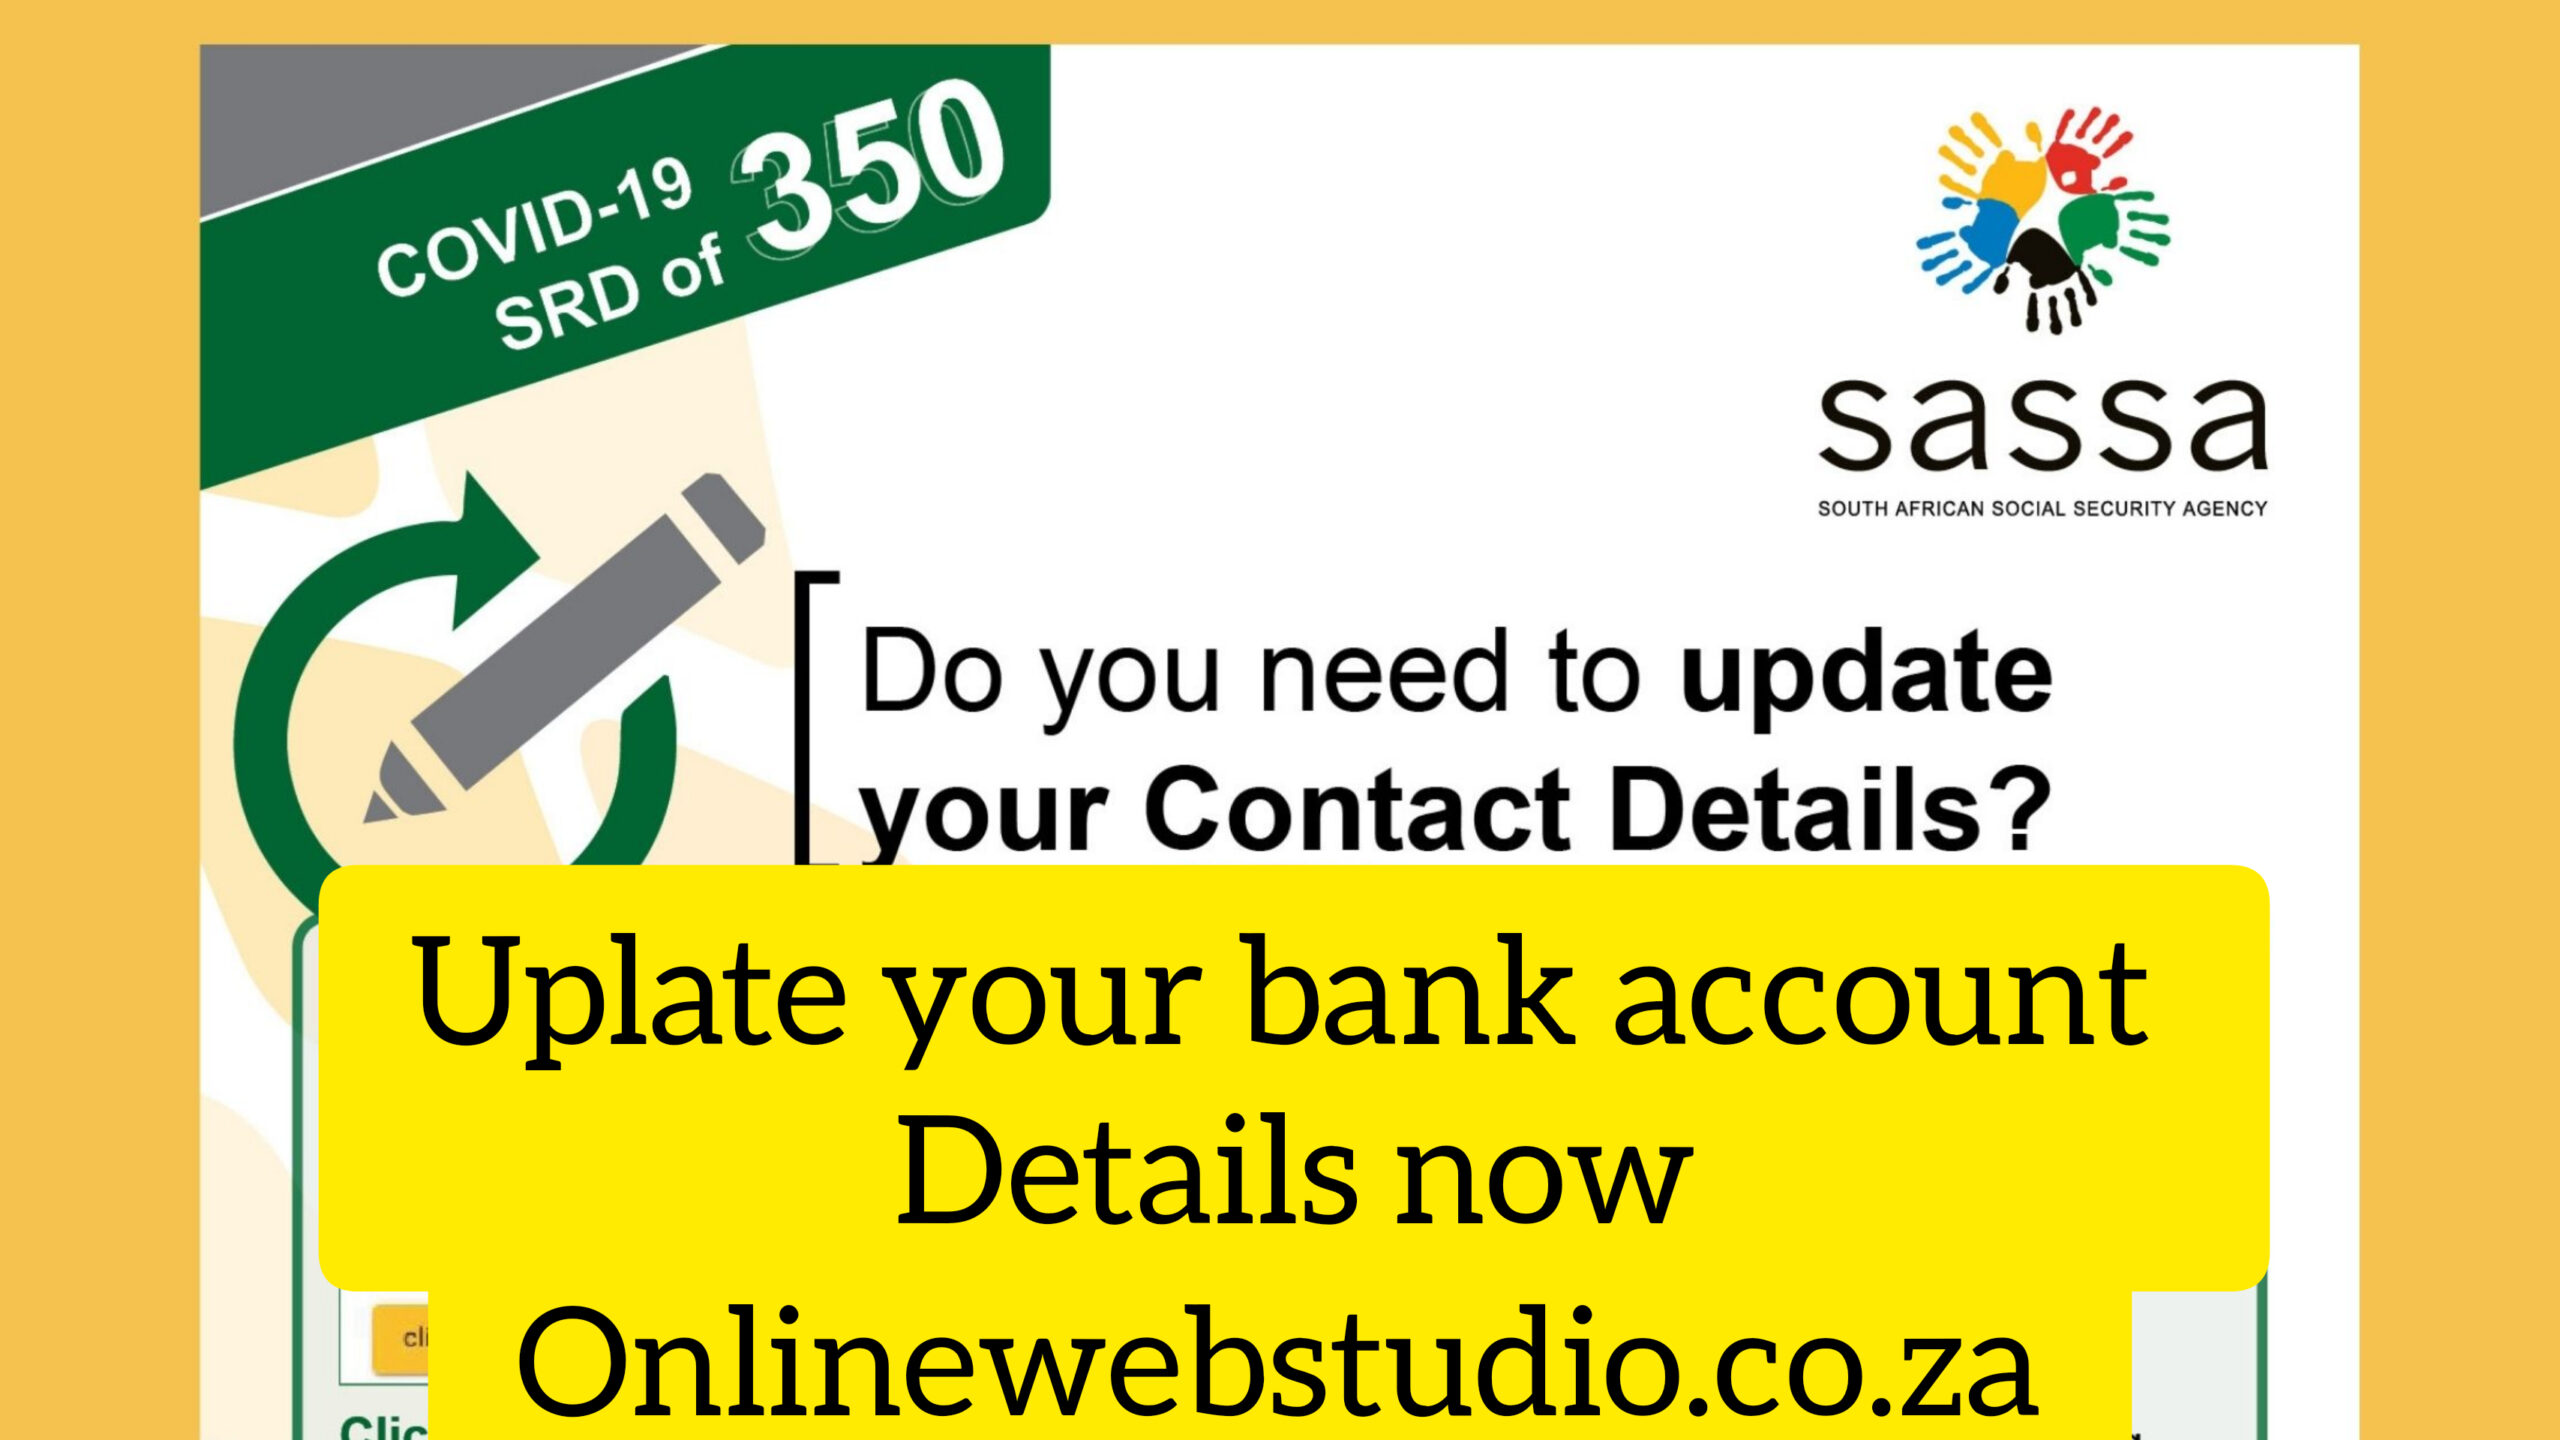 SASSA SRD 350 CONFIRM PAYMENT DATES NOW. UPDATE YOUR BANKING DETAILS